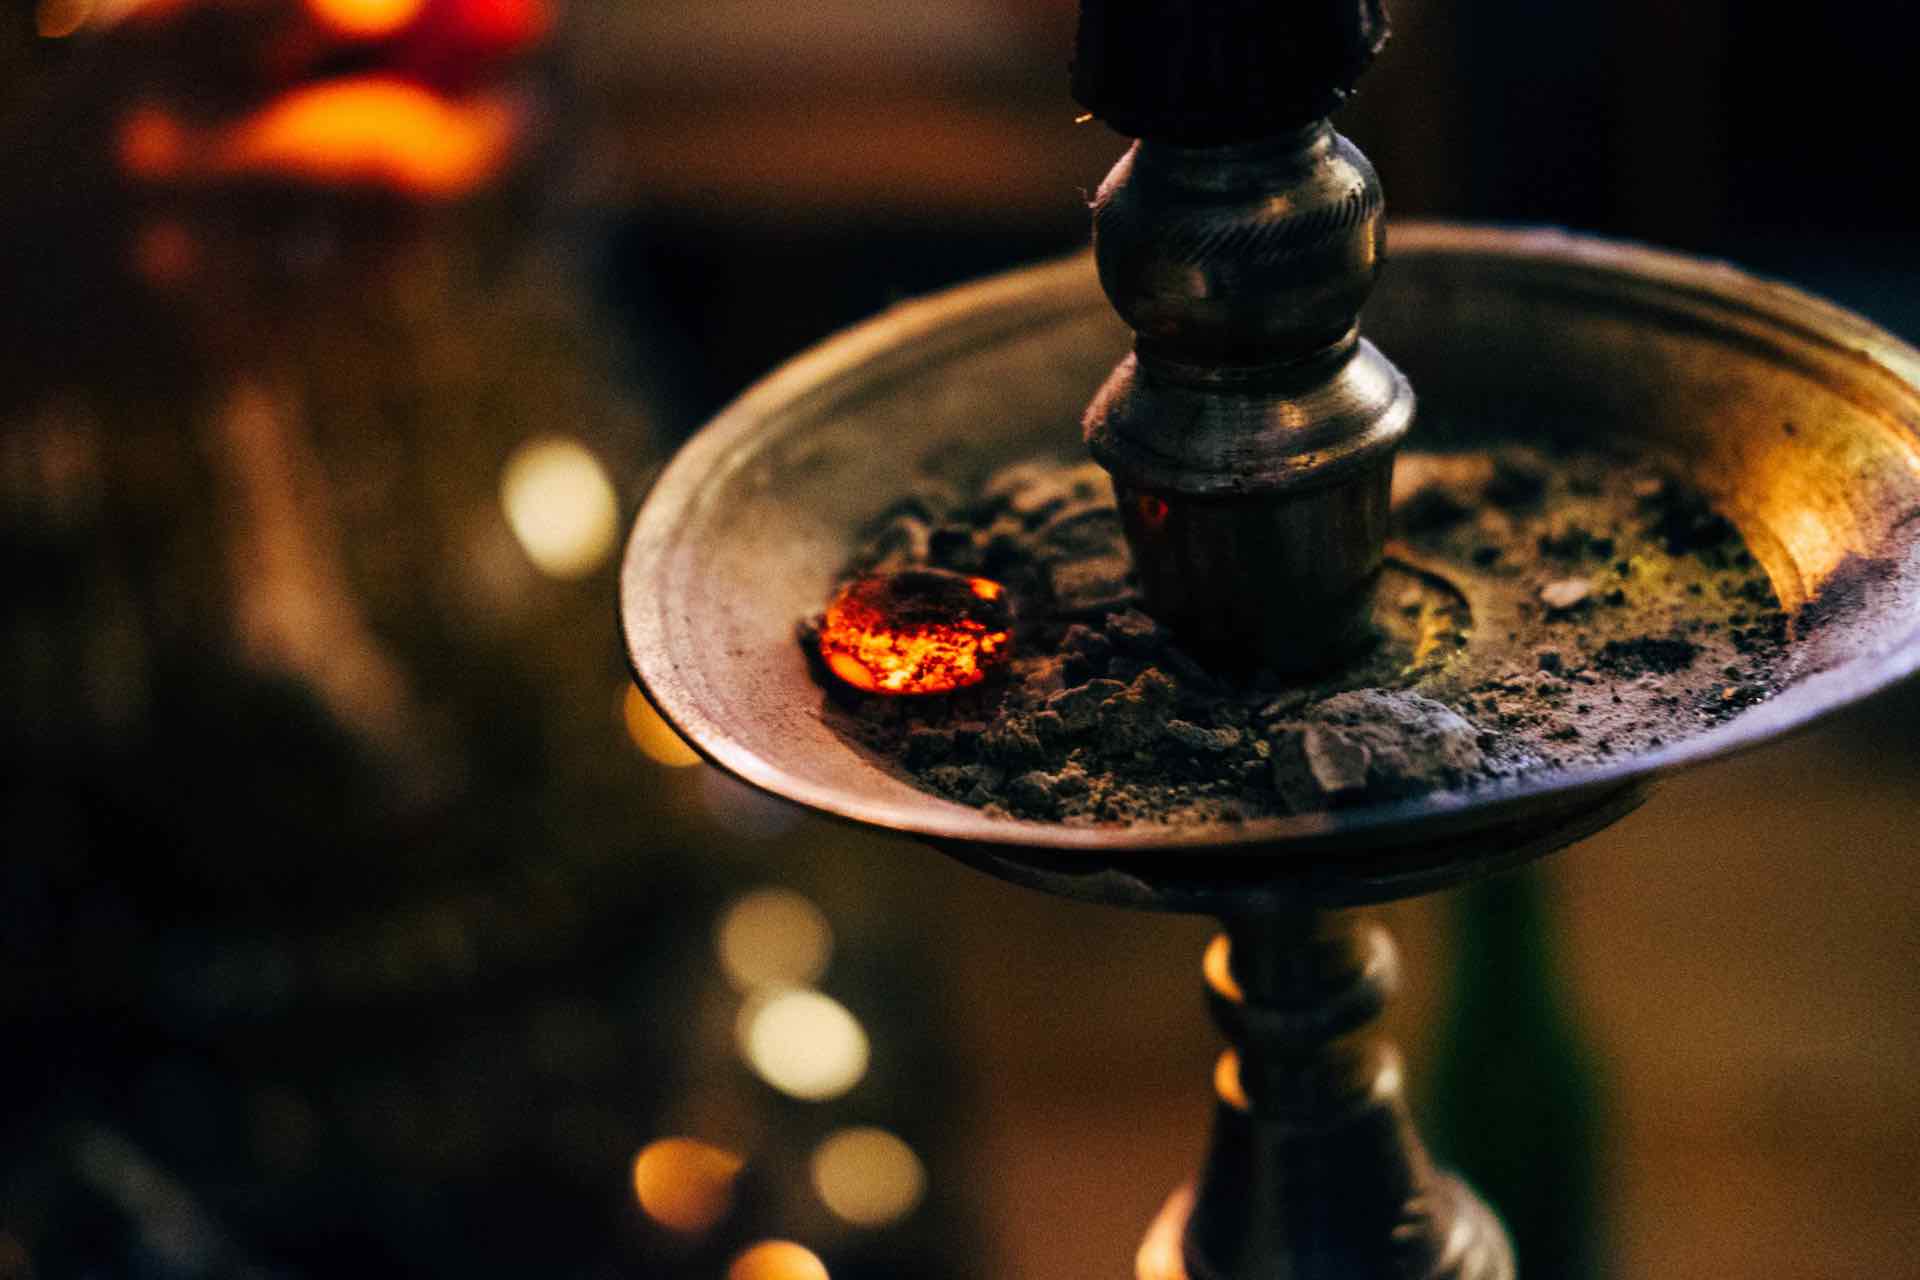 Discover Tradition and Culture while traveling: The Resurgence and history of Shisha across the Globe